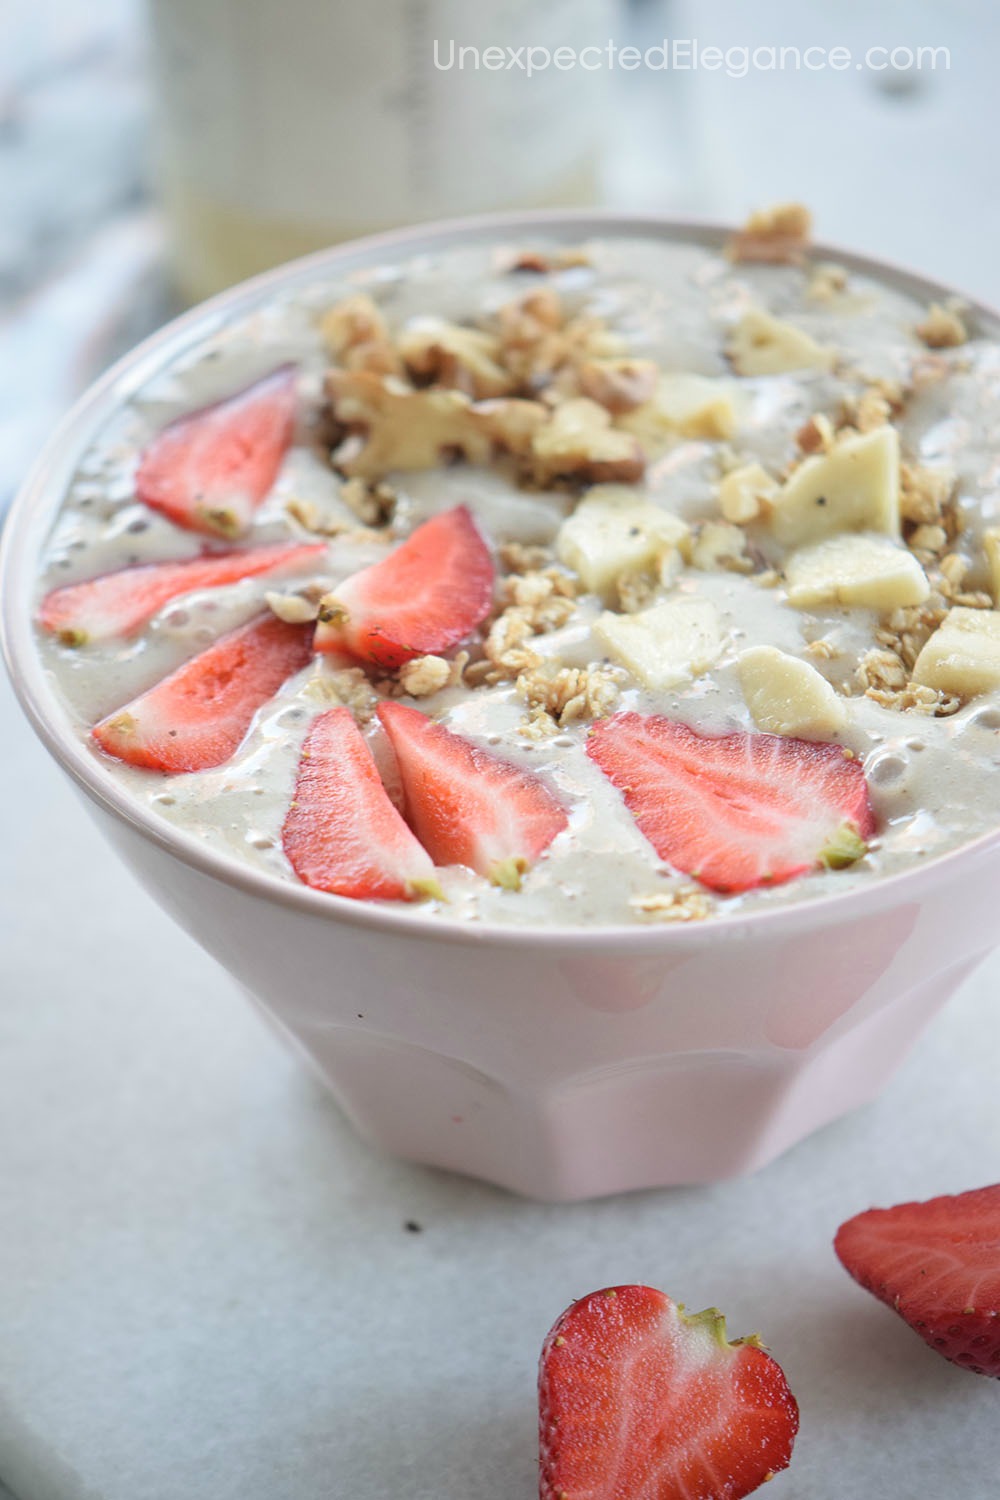 This smoothie bowl recipe is a great meal replacement. It's vegan and paleo friendly!